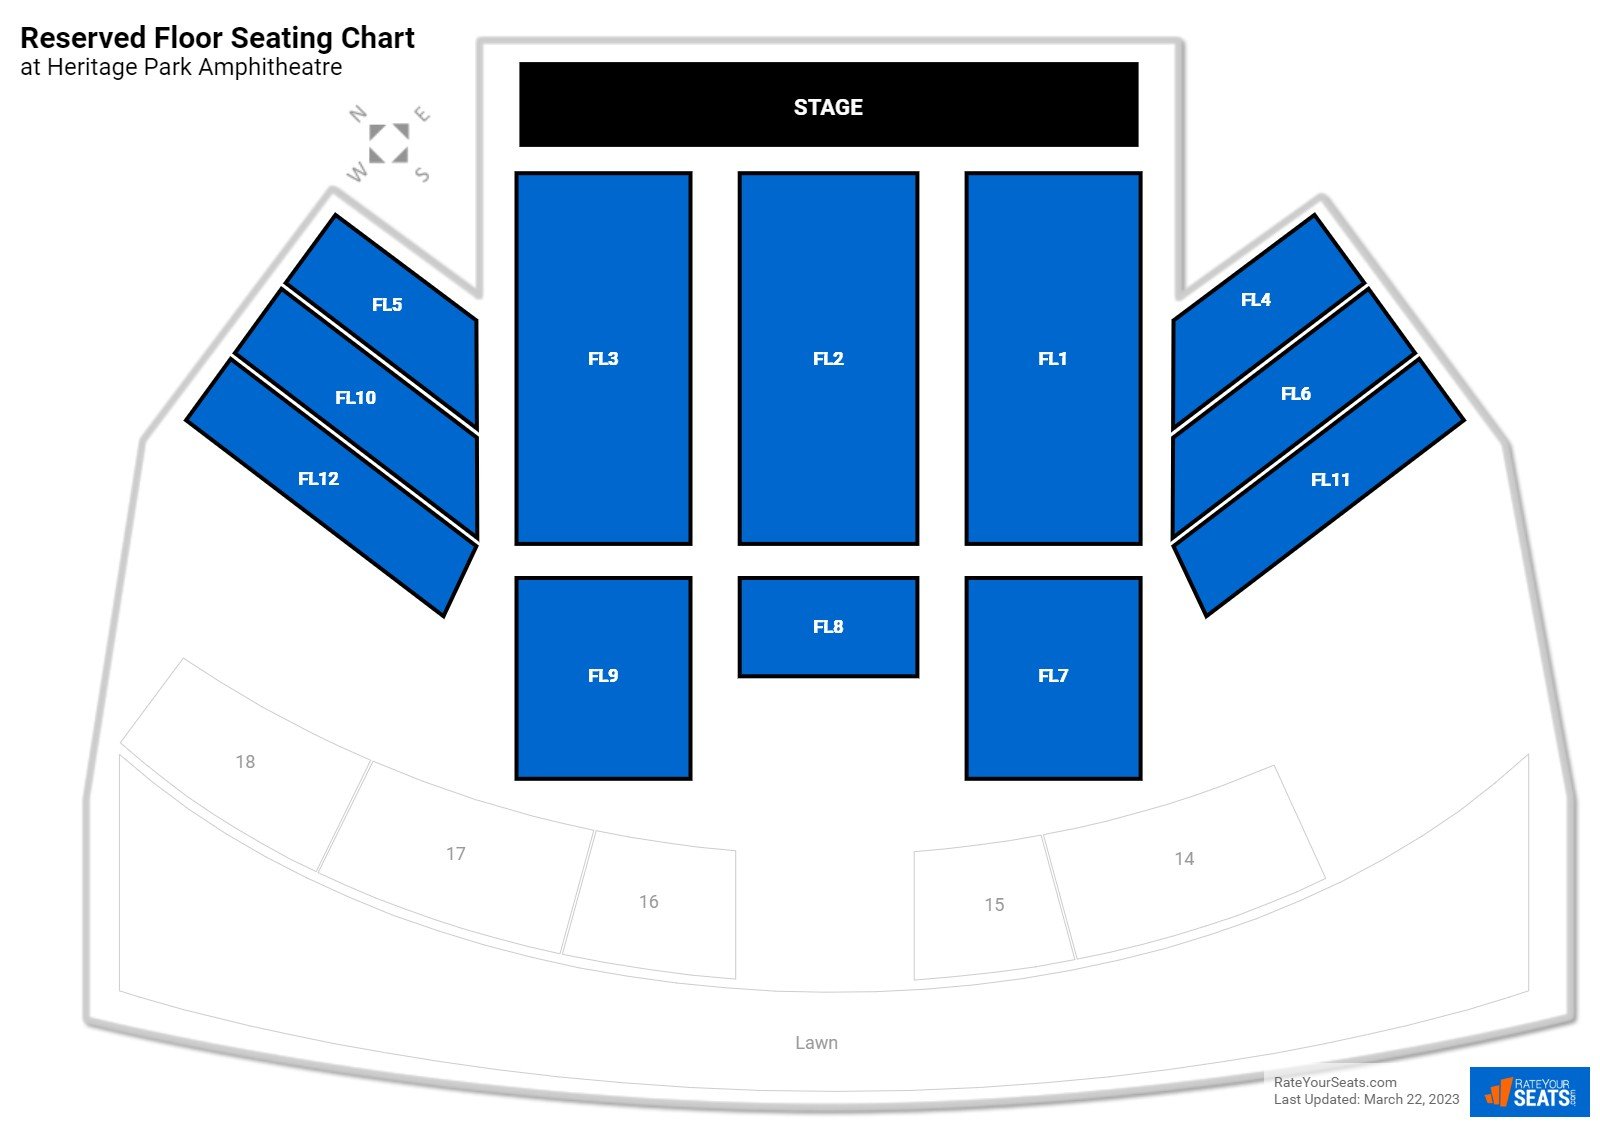 Concert Reserved Floor Seating Chart at Heritage Park Amphitheatre